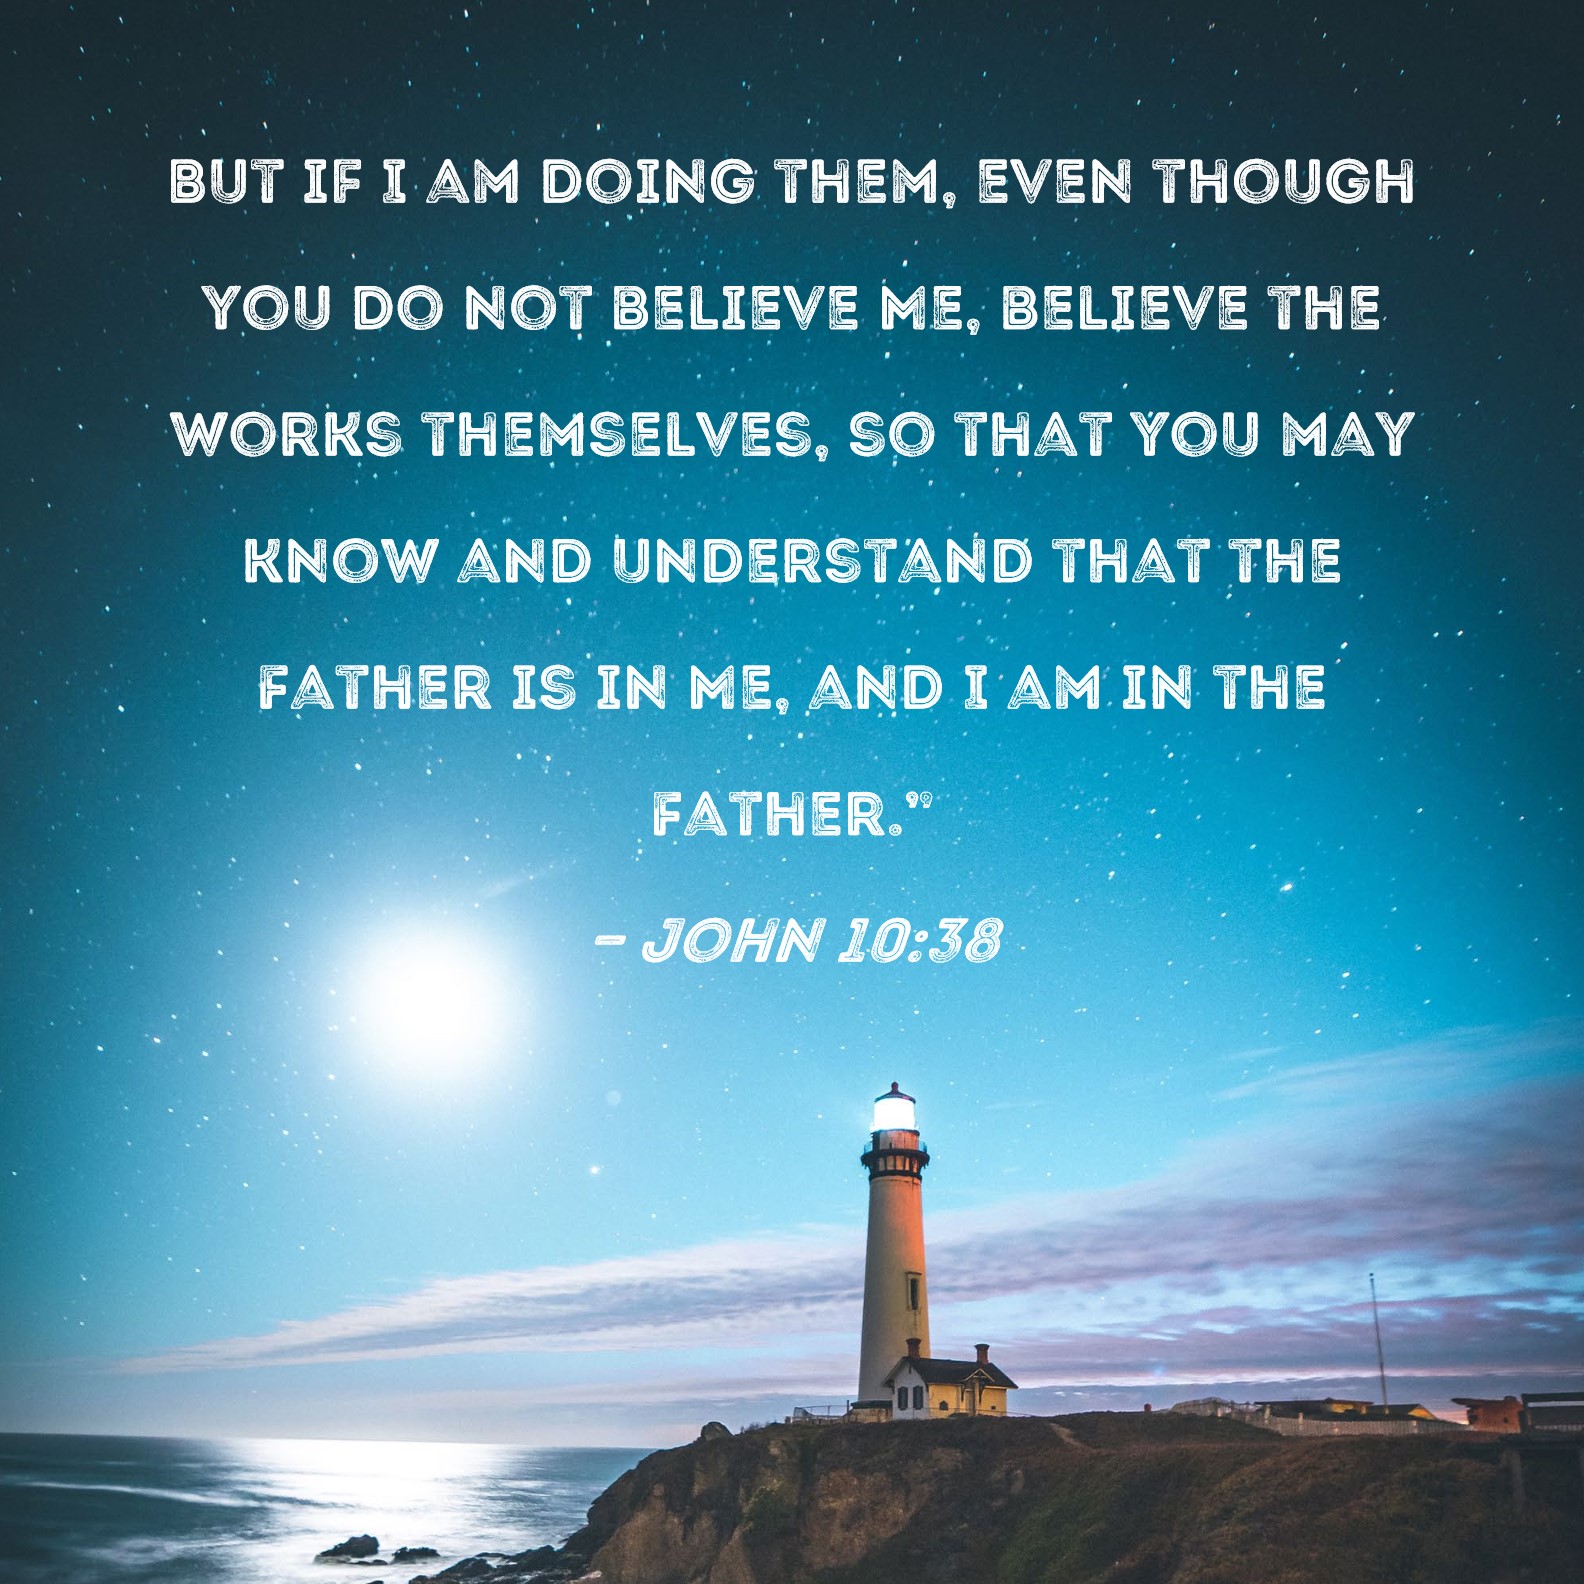 John 10:38 But if I am doing them, even though you do not believe